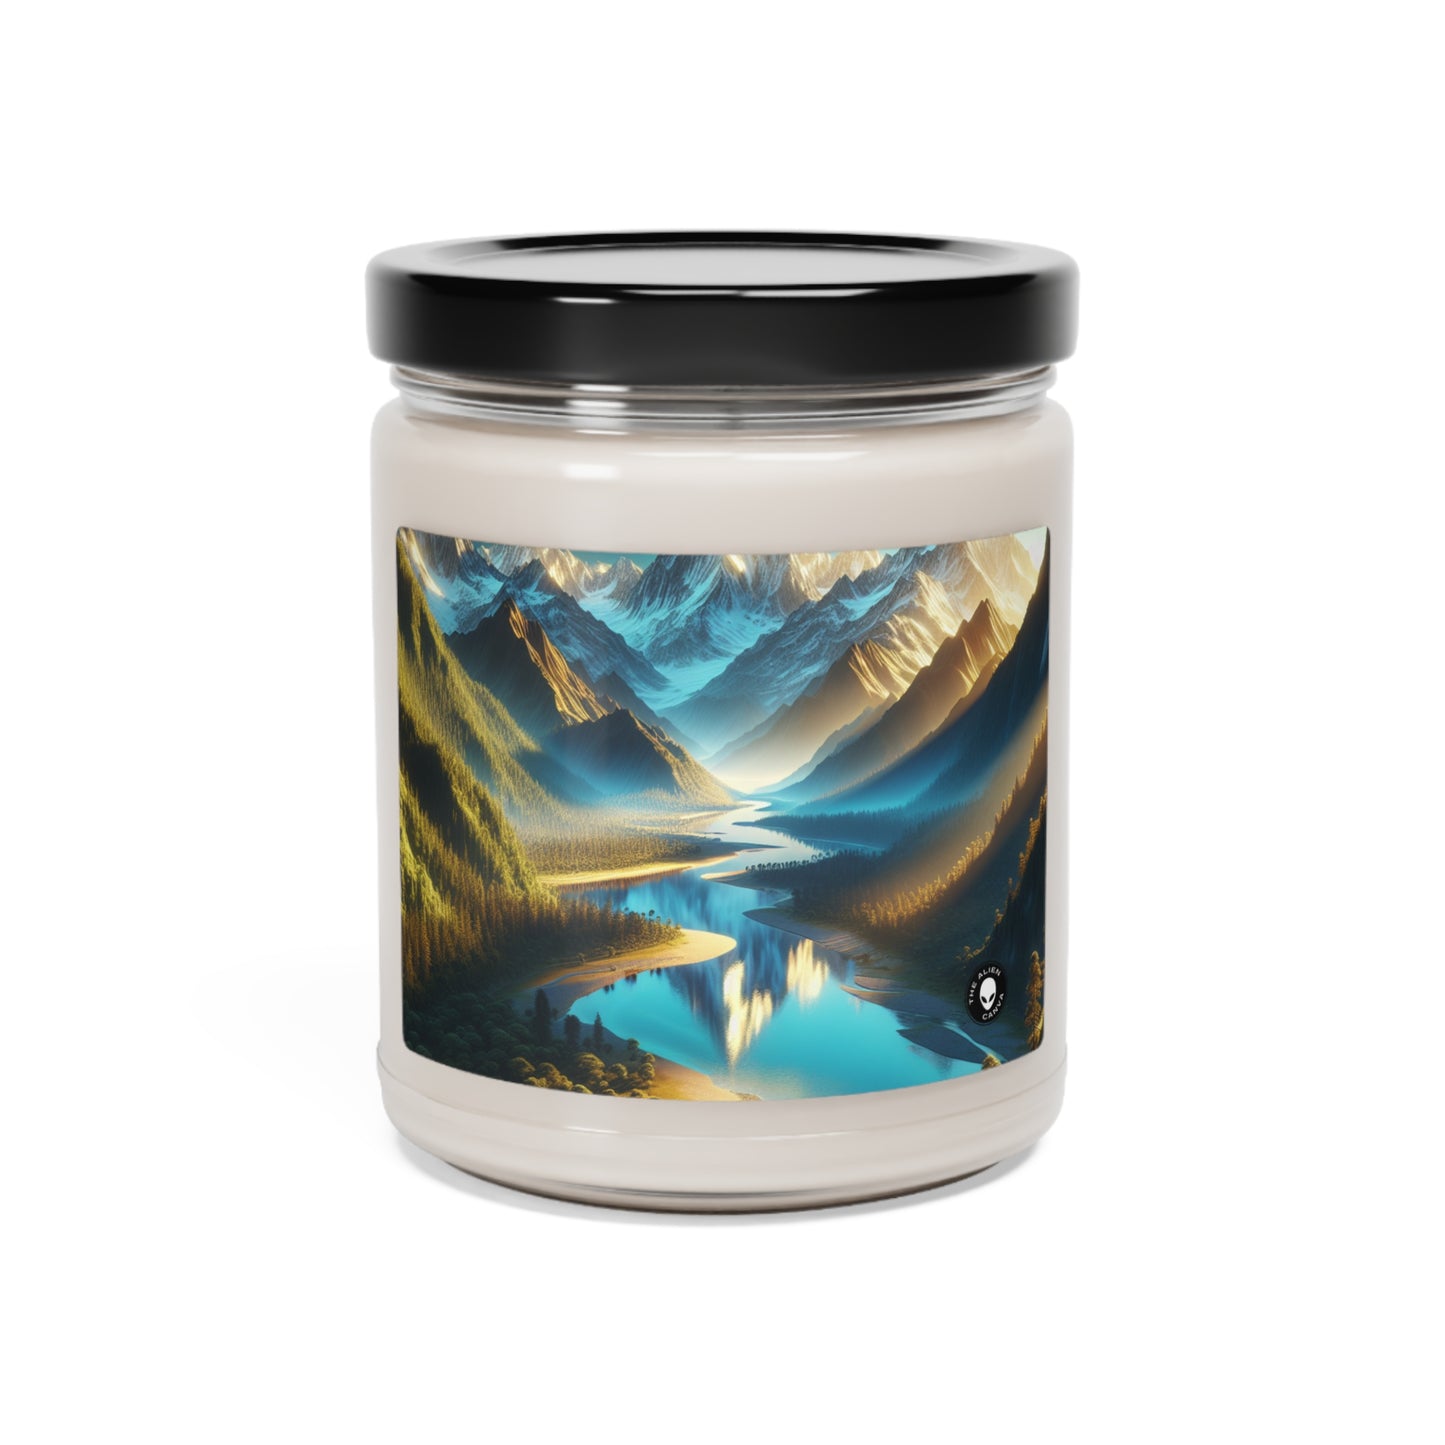 "Serenity's Palette: A Sunset Symphony" - The Alien Scented Soy Candle 9oz Photorealism